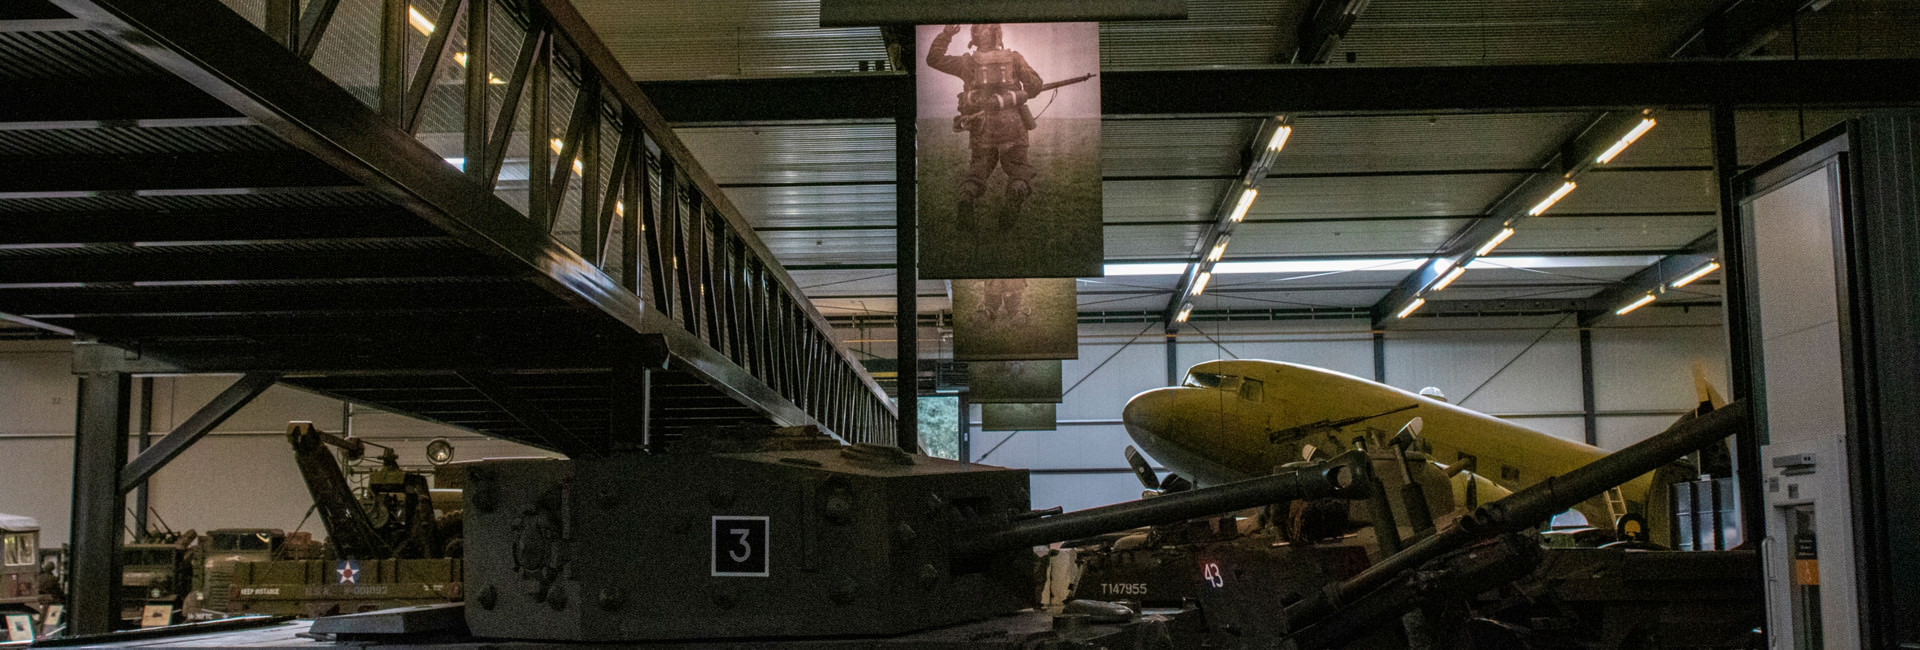 oorlogsmuseum - Military vehicle collection